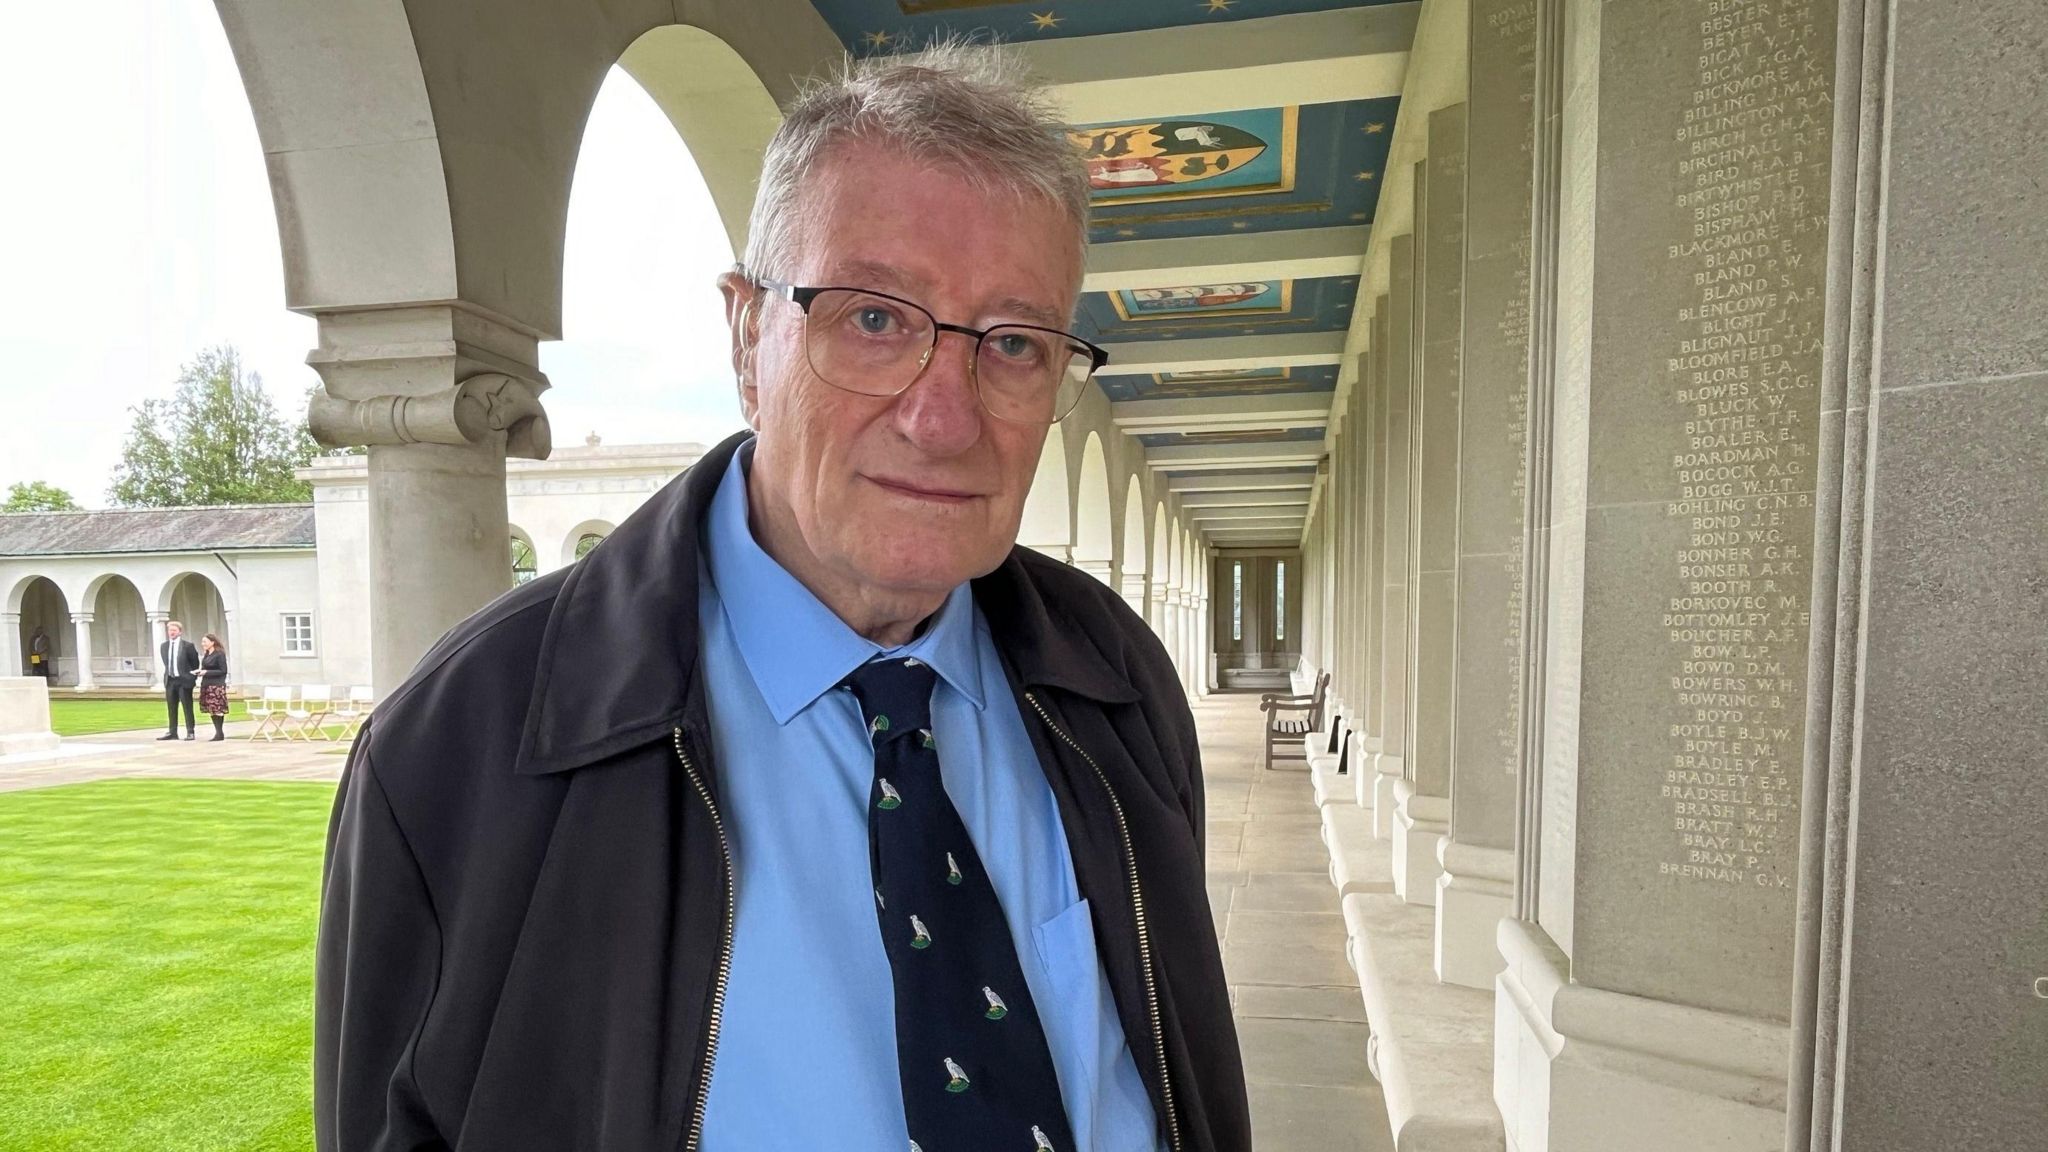 Peter Clare wearing a blue shirt and black tie at the Runnymede Air Forces Memorial